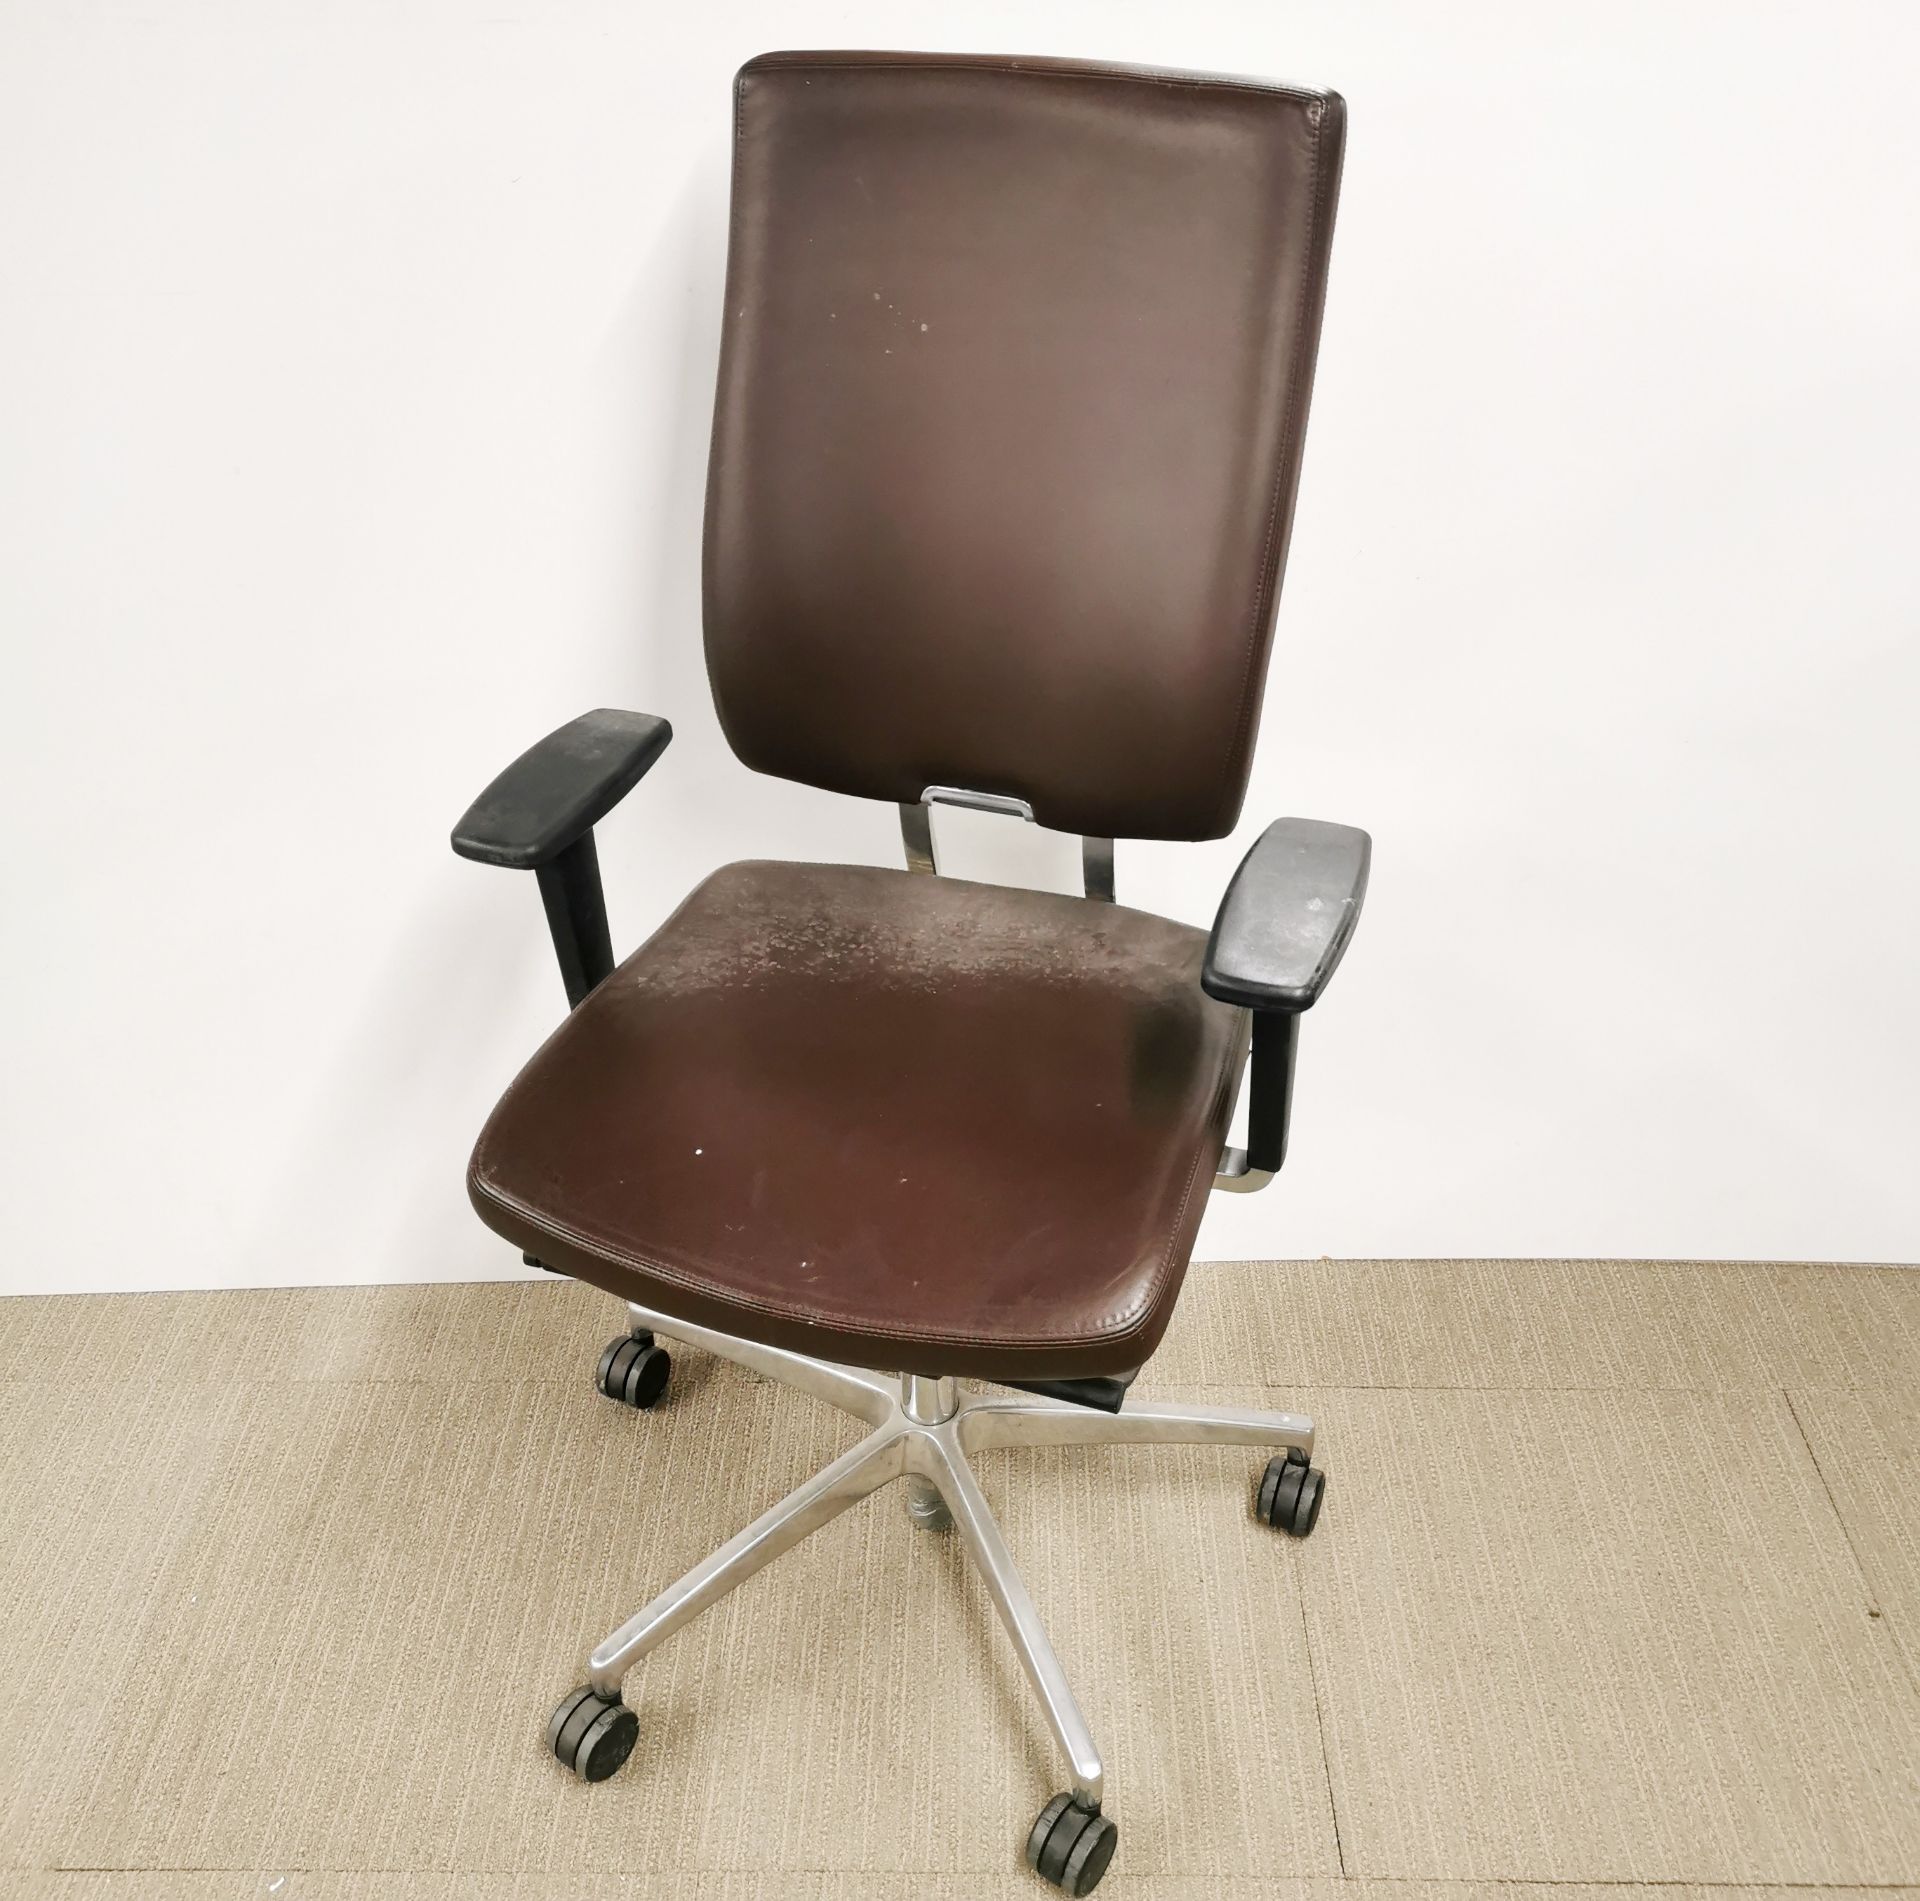 An adjustable faux leather and chrome revolving desk chair.